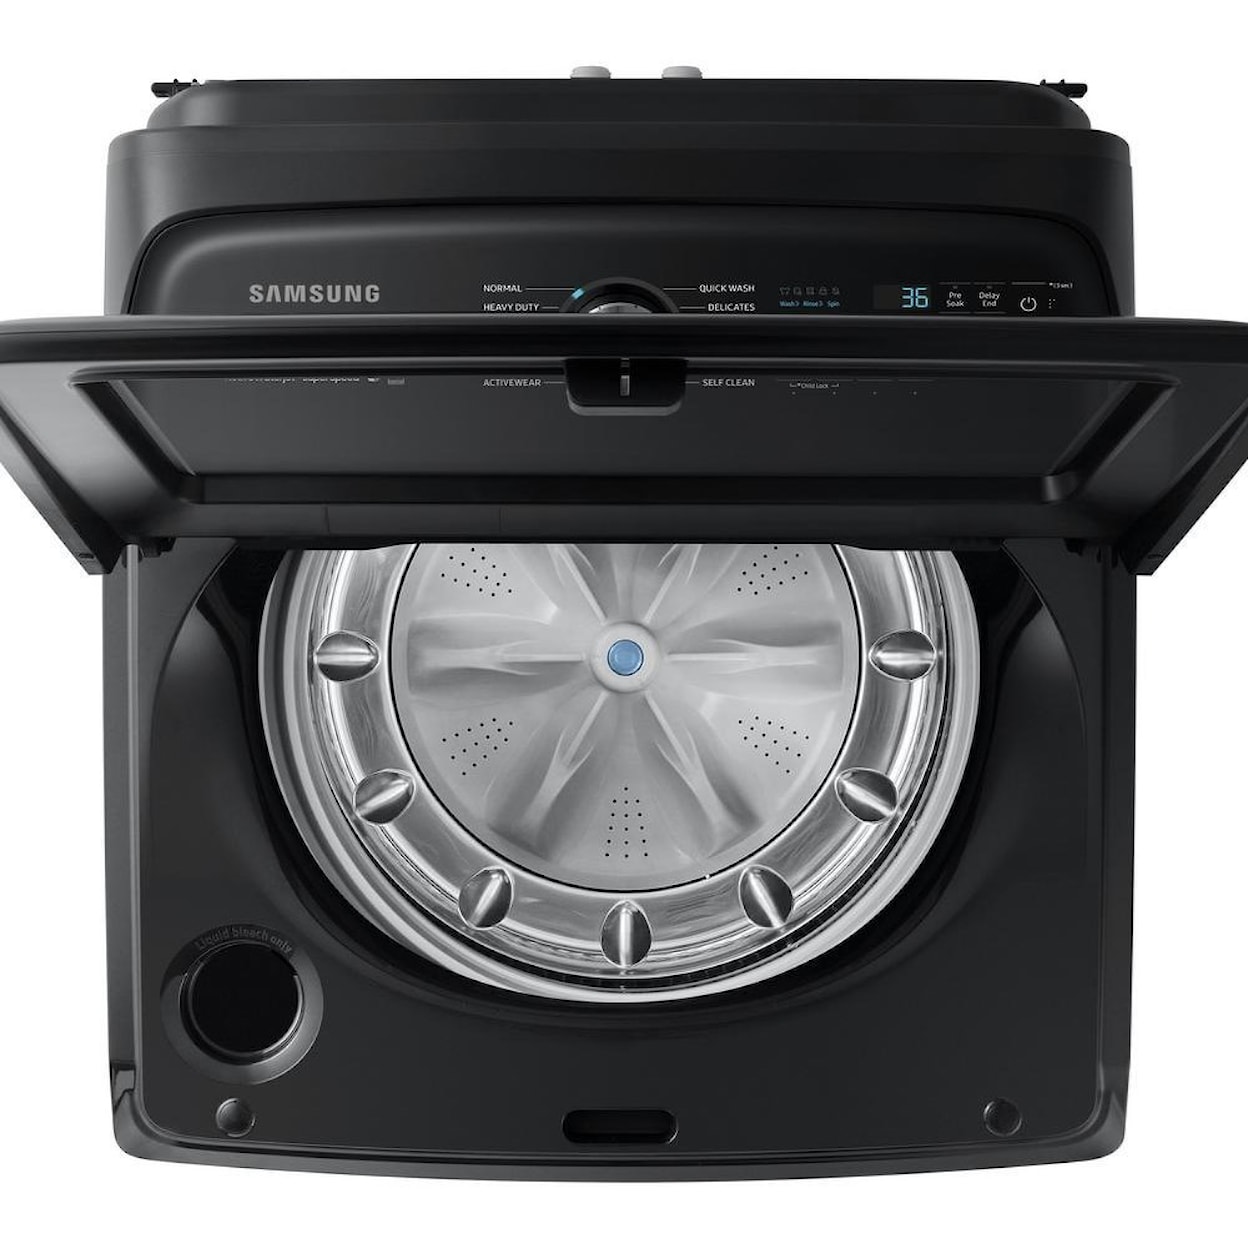 Samsung Appliances Top Load Washers - Samsung 5.0 cu. ft. Top Load Washer with Super Speed